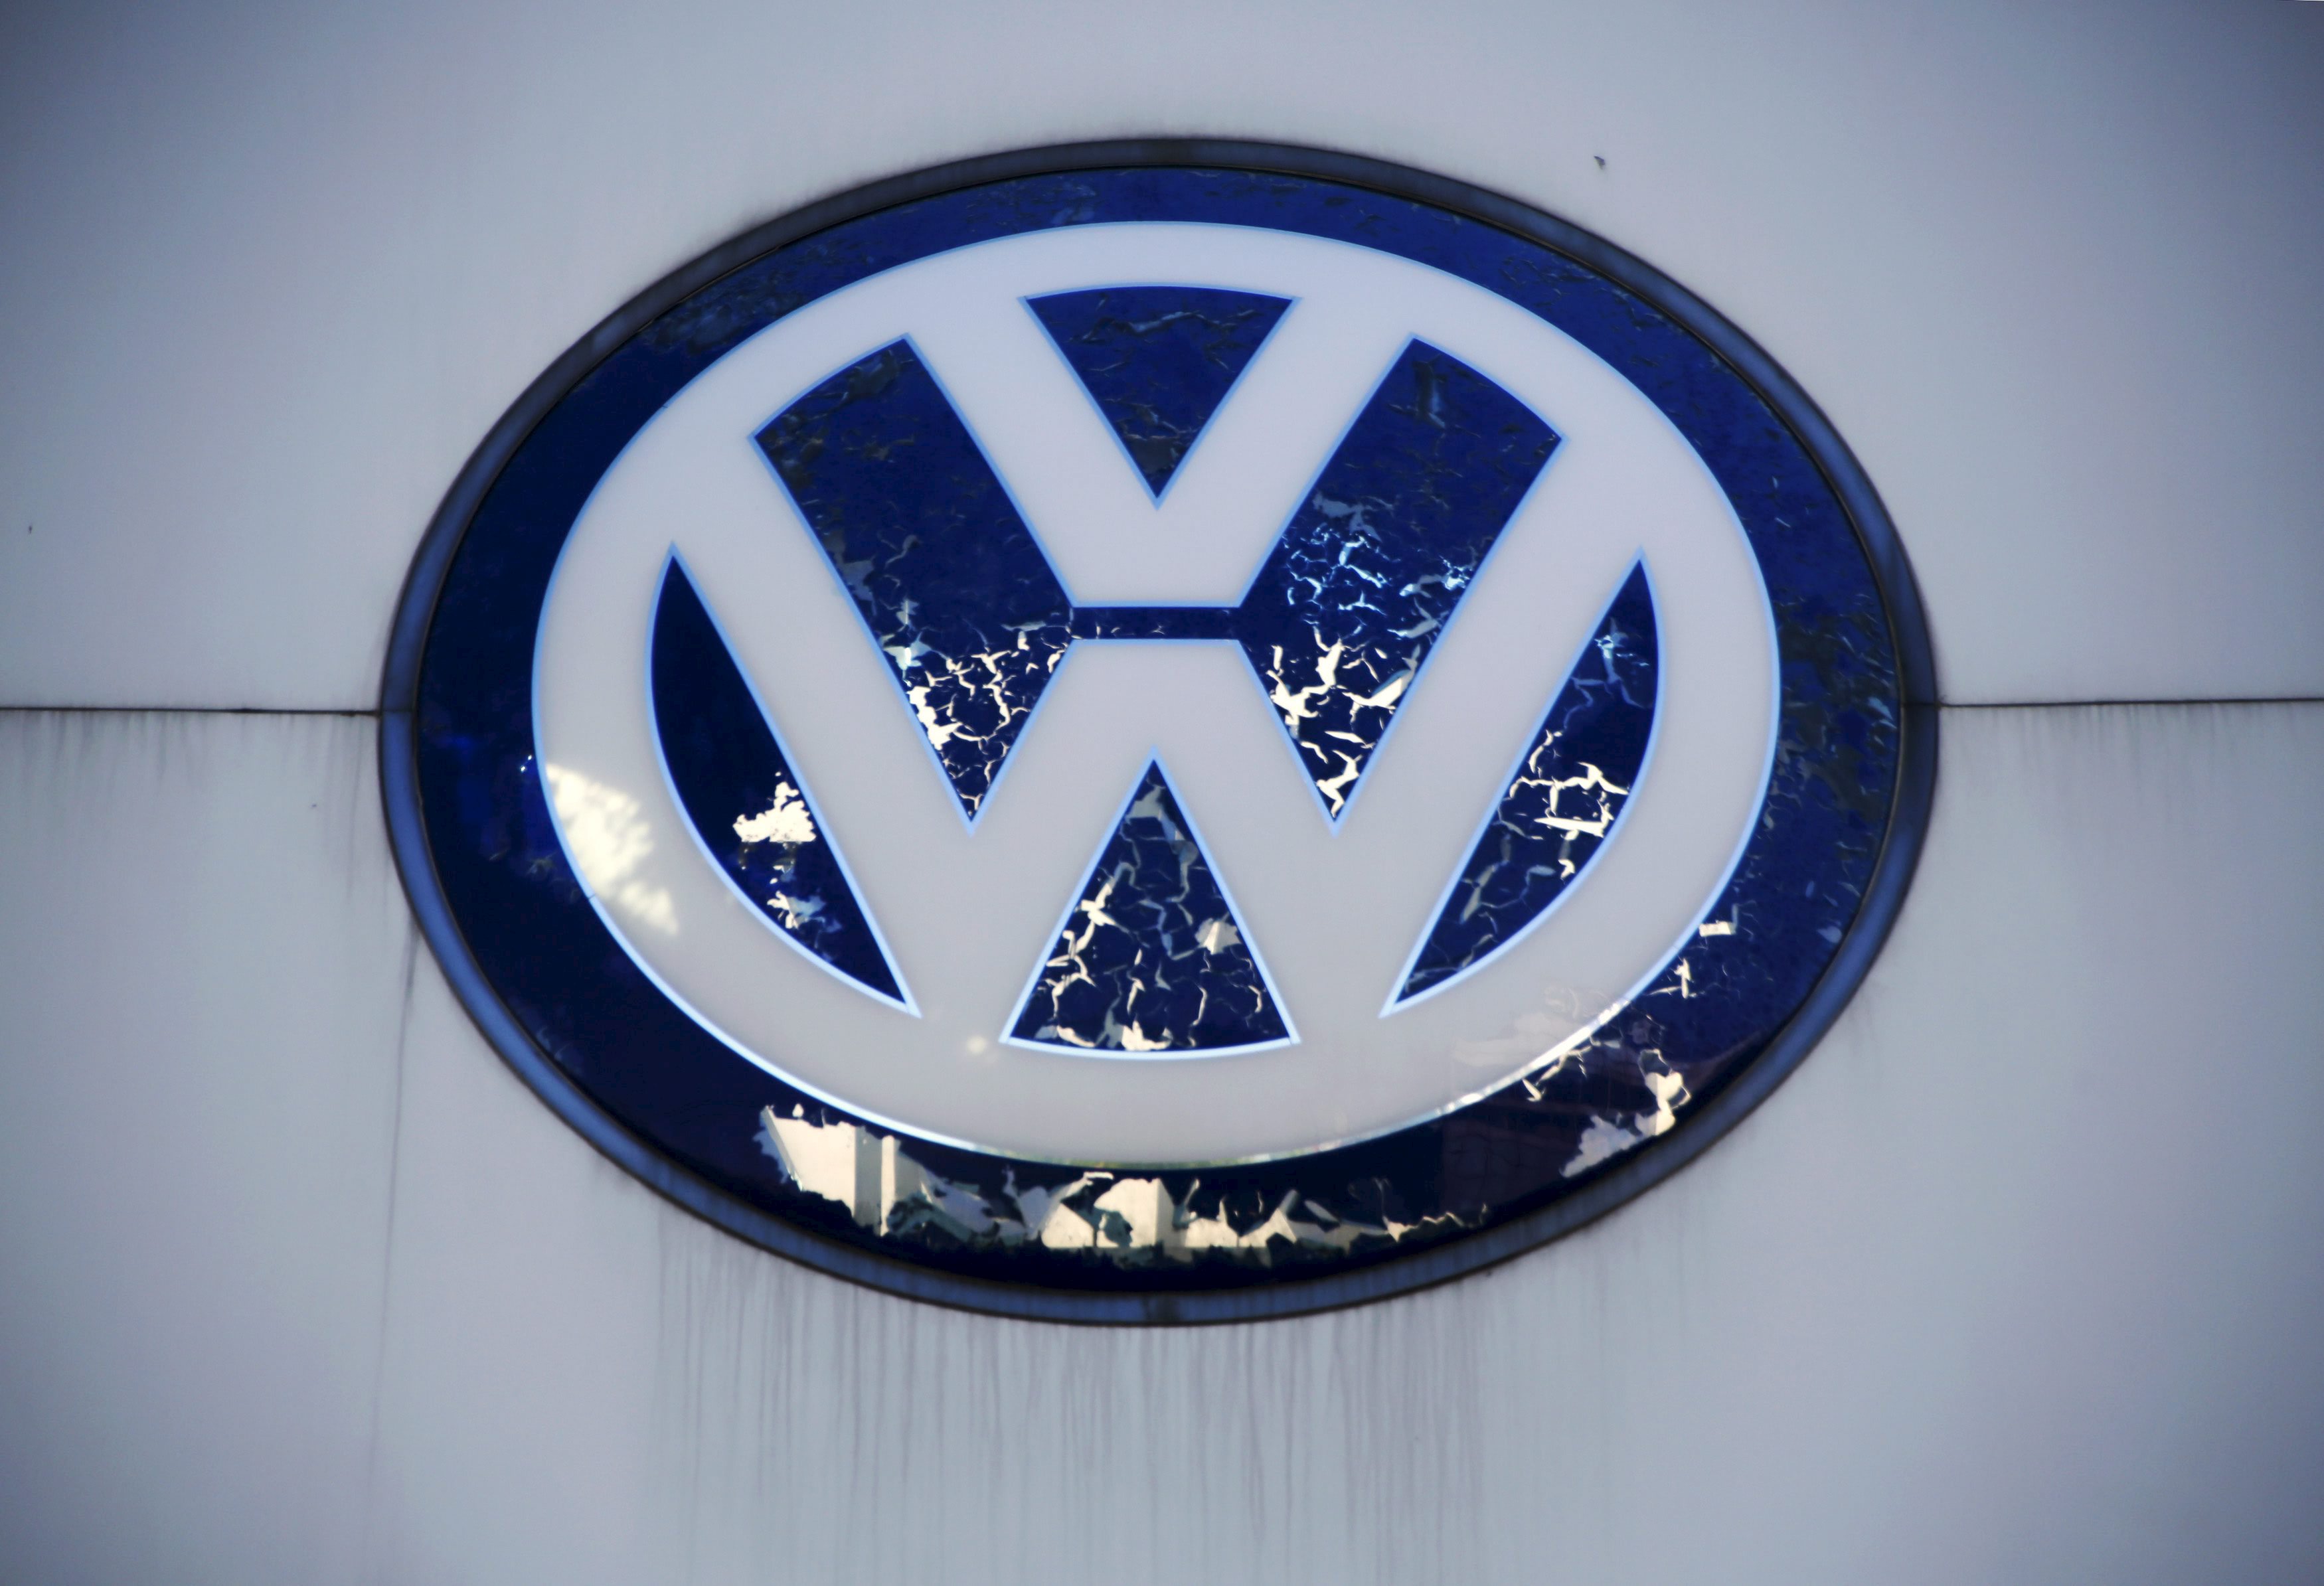 Volkswagen's logo is seen at its dealer shop in Beijing, China, October 1, 2015. China has halved sales tax on small cars to revive growth in the world's biggest automobile market, a move likely to provide a limited boost to carmakers including Volkswagen AG, the company embroiled in a global diesel emissions scandal.   REUTERS/Kim Kyung-Hoon